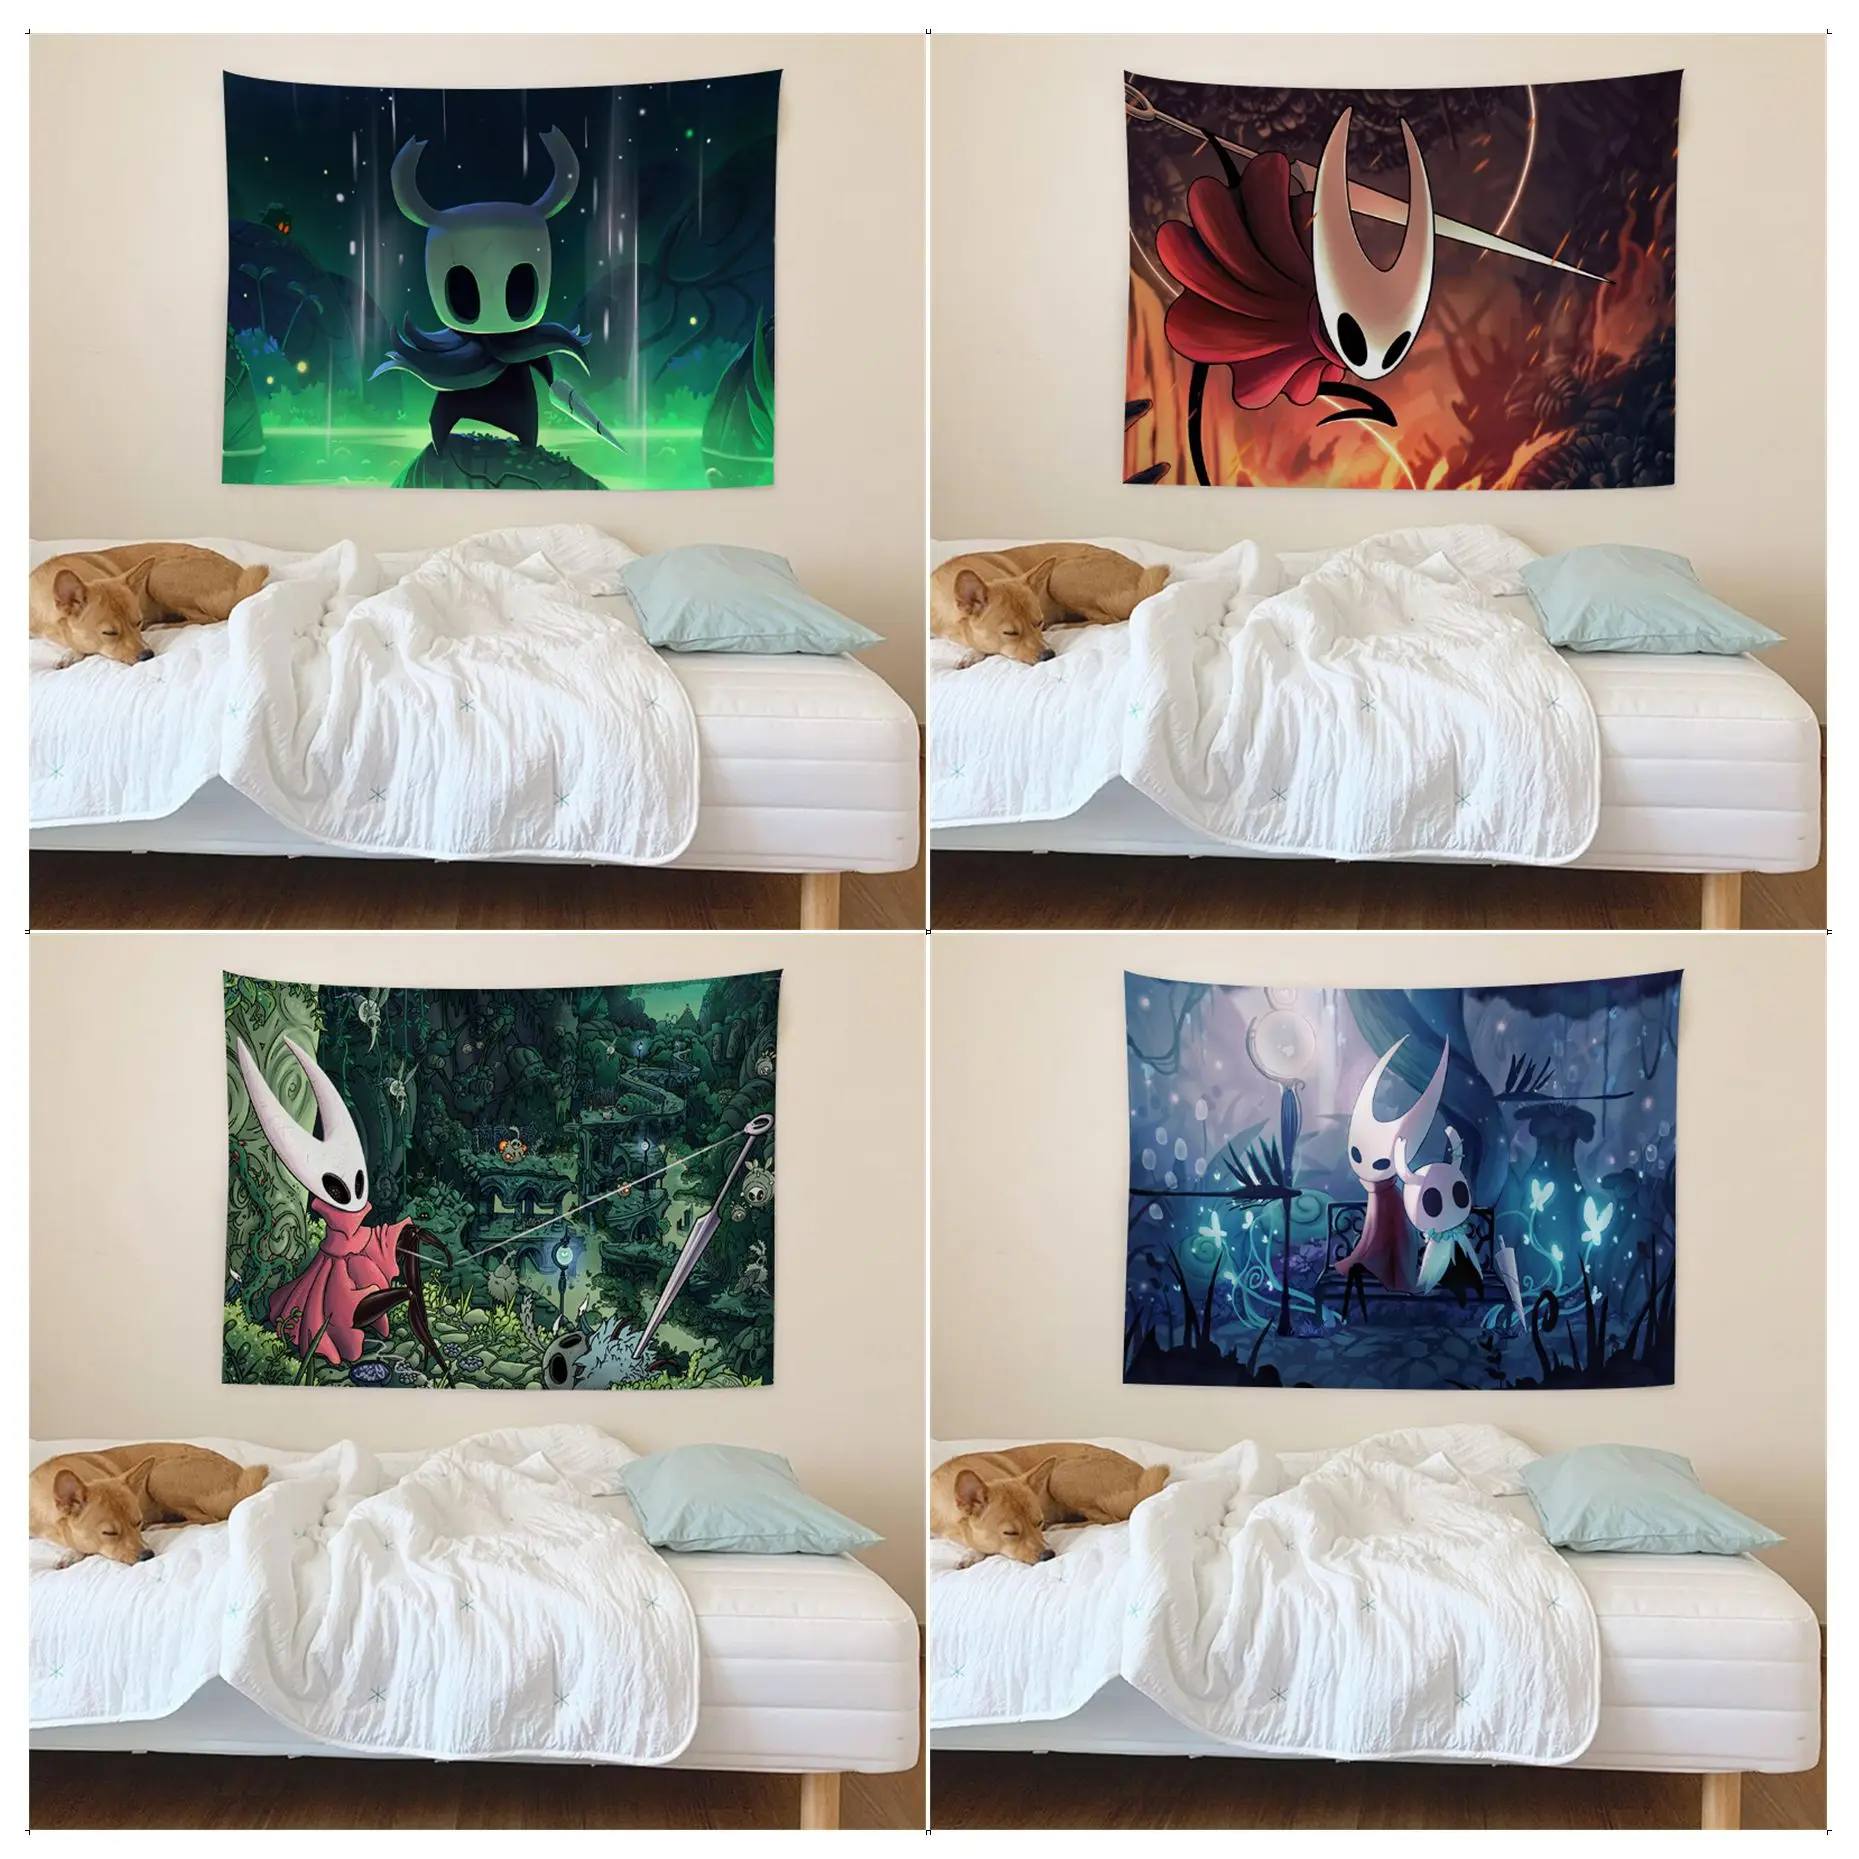 

Hollow Knight Tapestry Chart Tapestry for Living Room Home Dorm Decor Art Home Decor